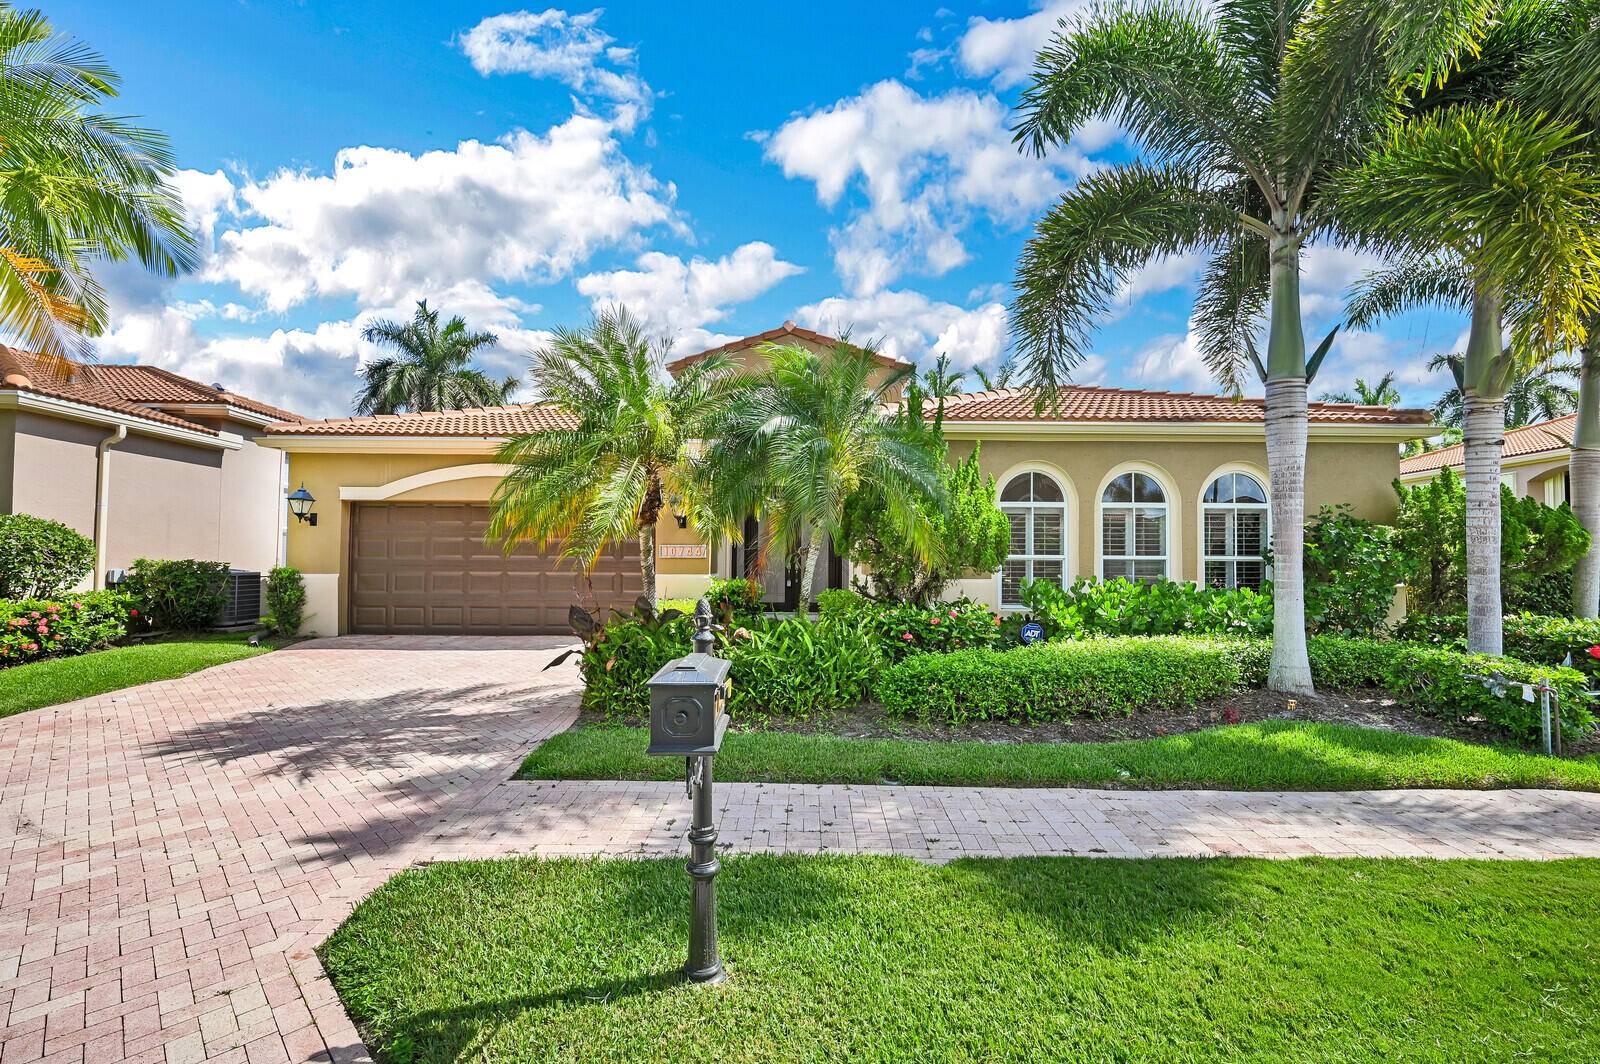 With a newer Roof and hurricane shutters this upgraded, move in ready and neutral 3BR 3BA Den single story home features an oversized screened in patio with a private pool ...